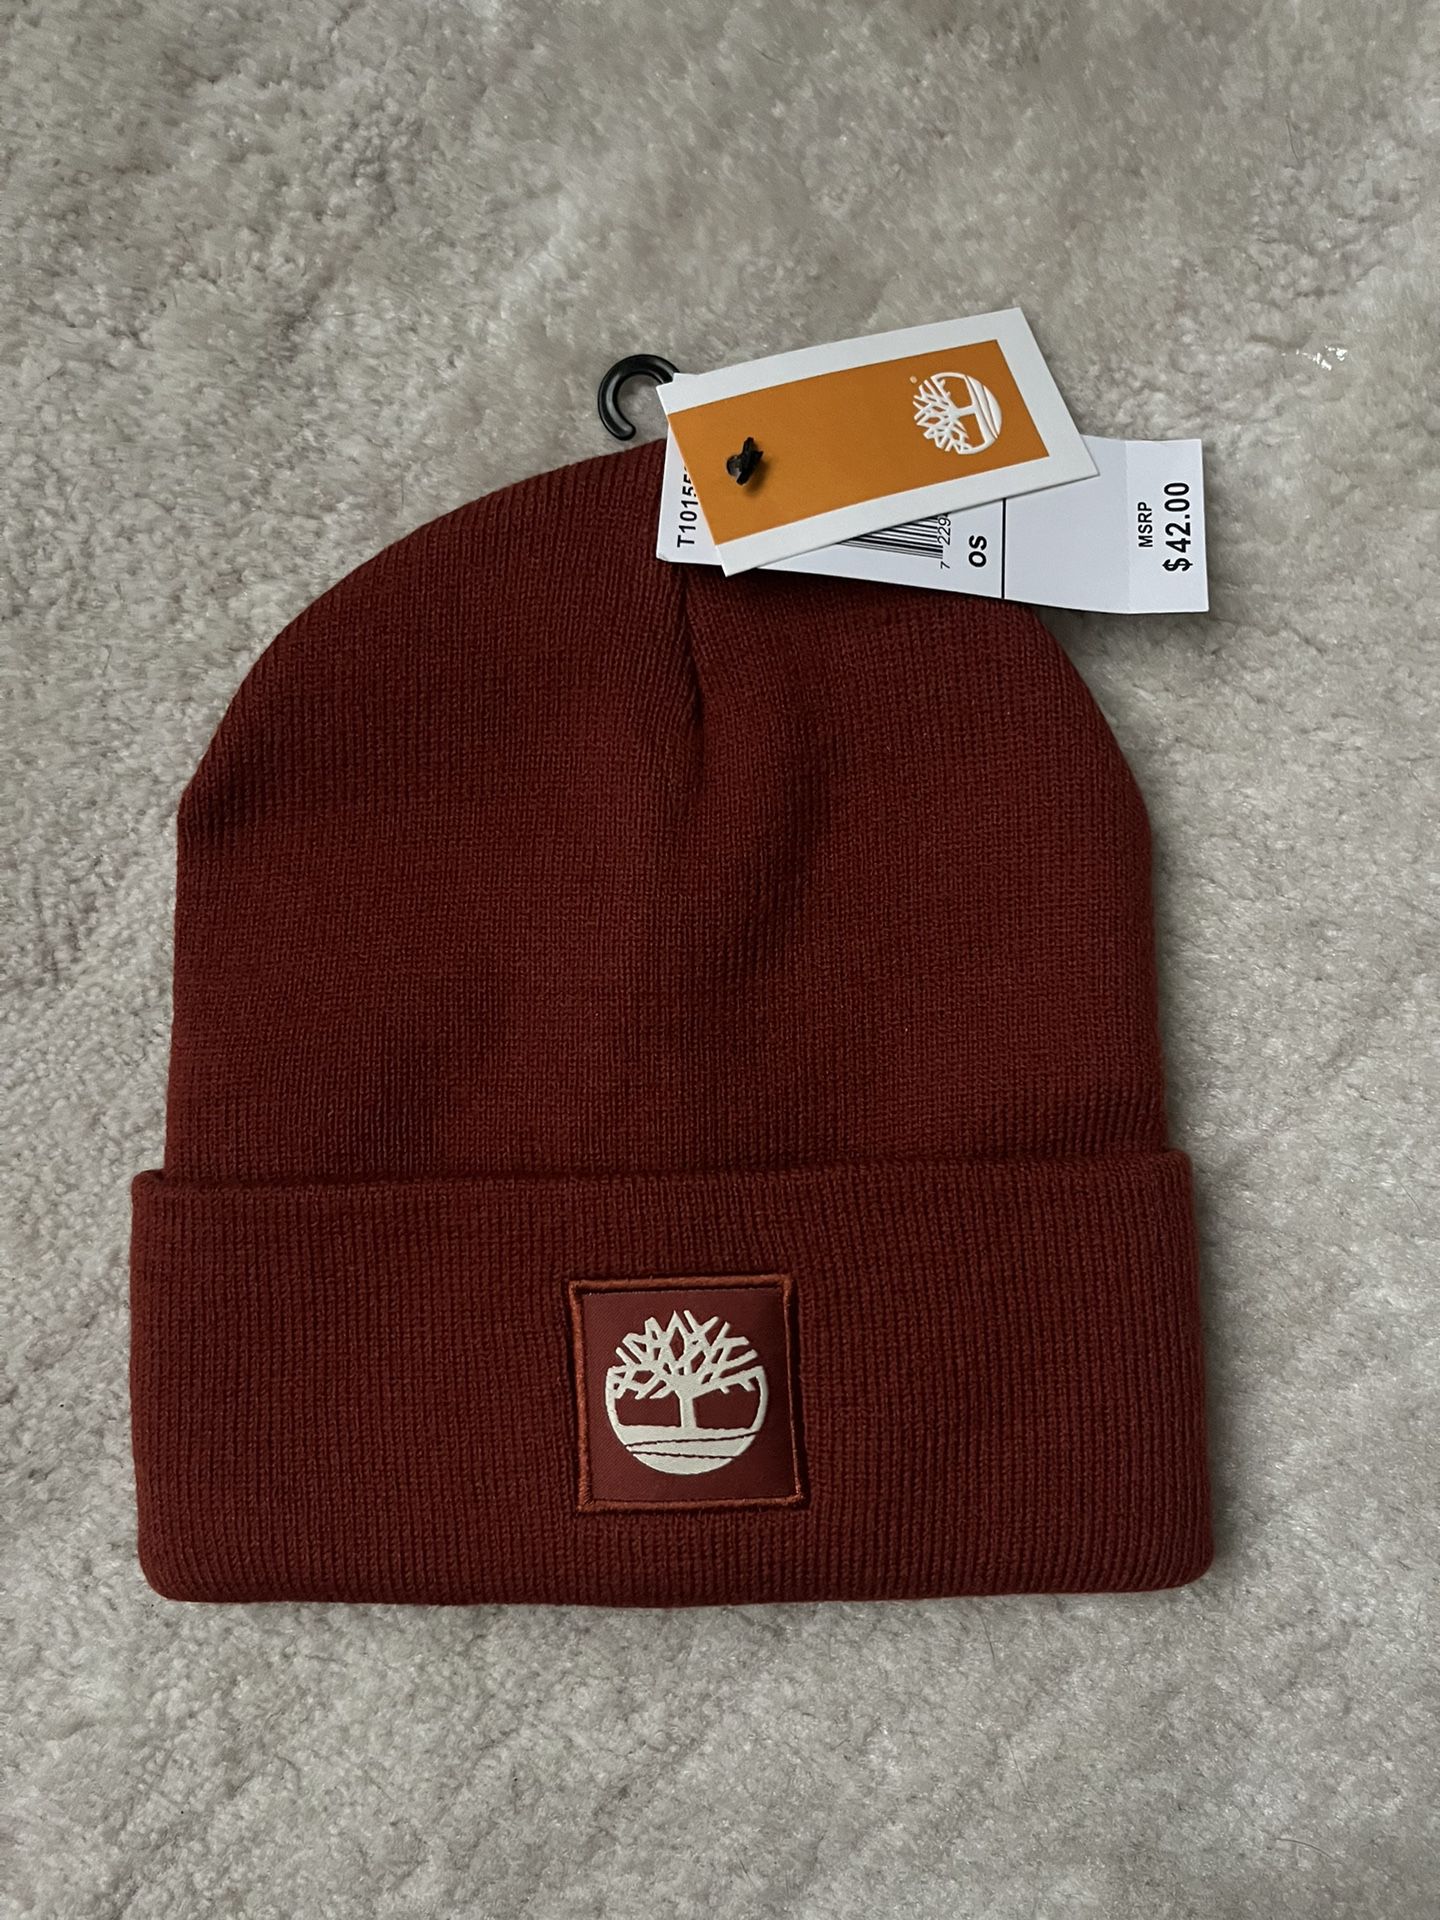 Timberland Beanie Hat, Brand New With Tags!!